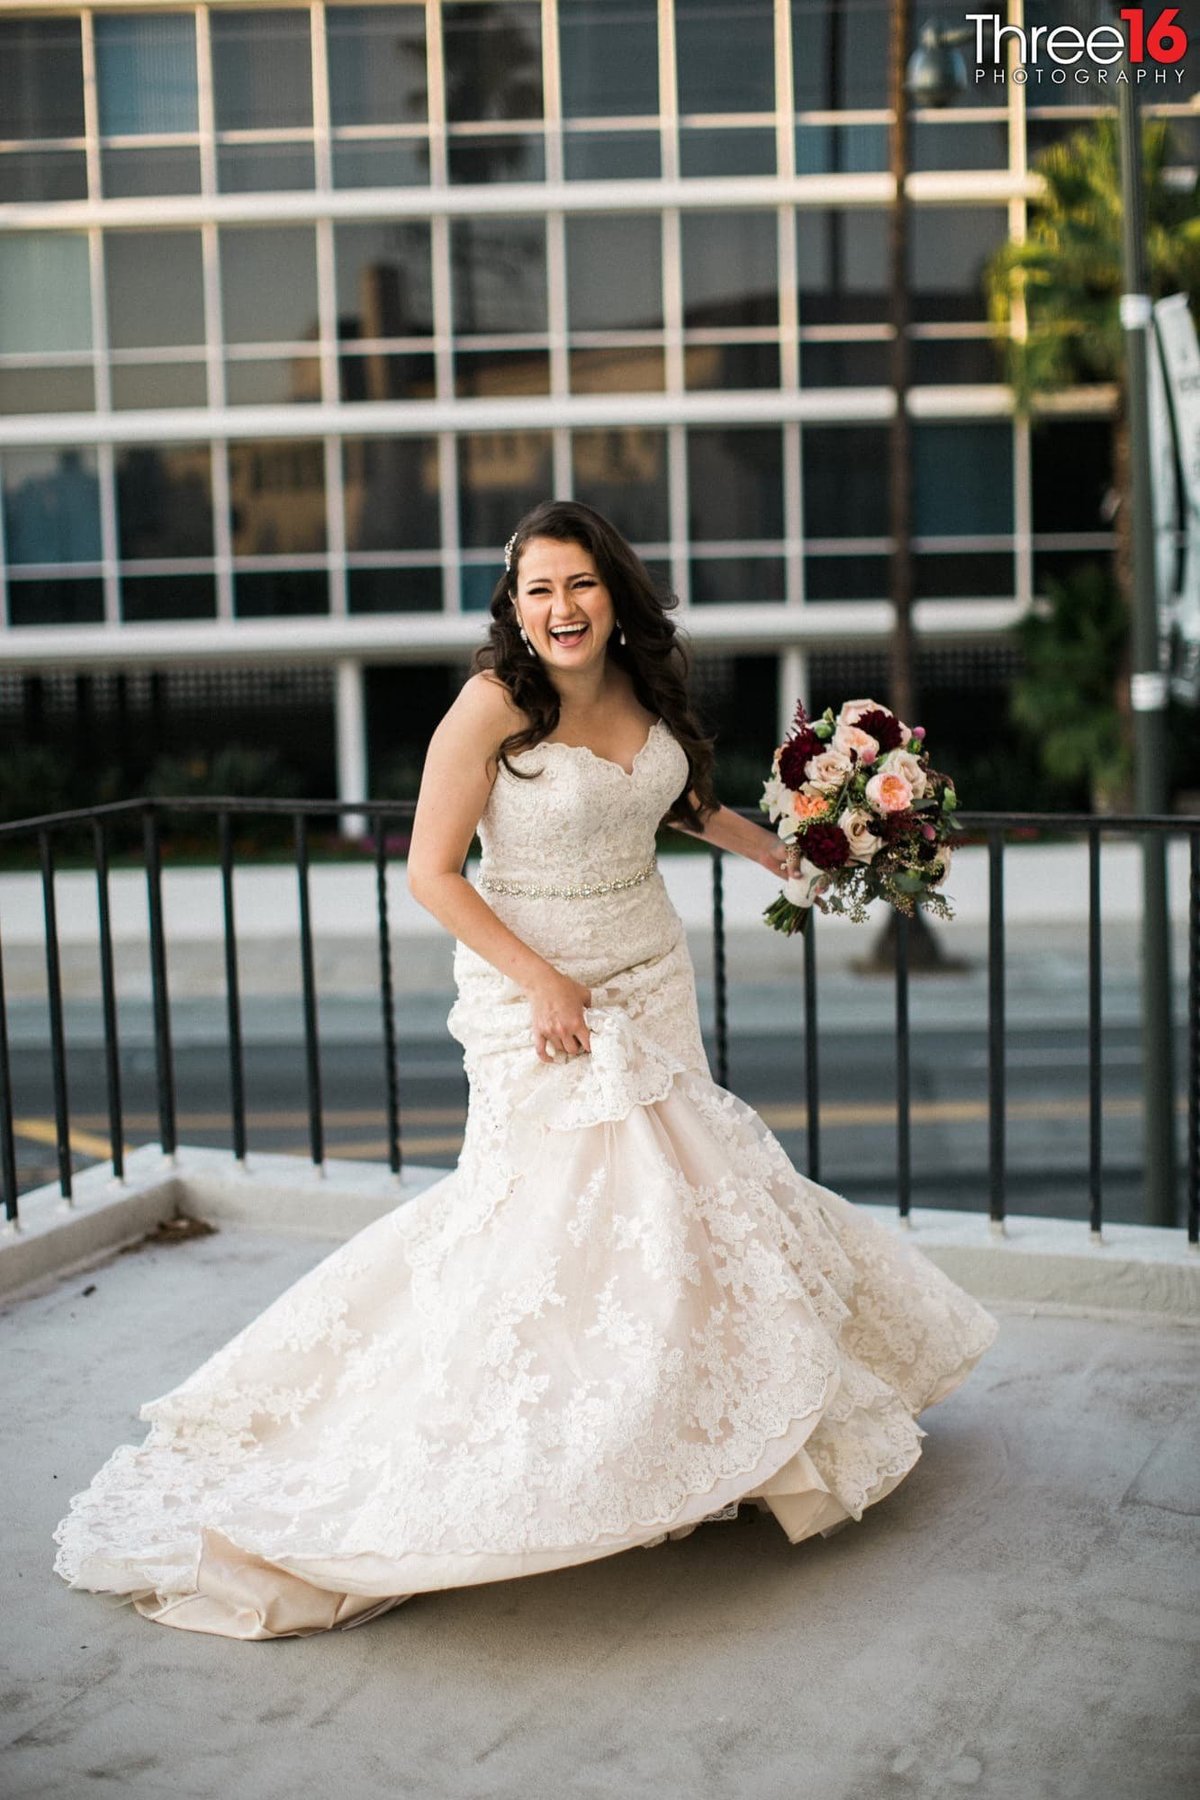 It's all smiles for this Bride as she poses for the camera